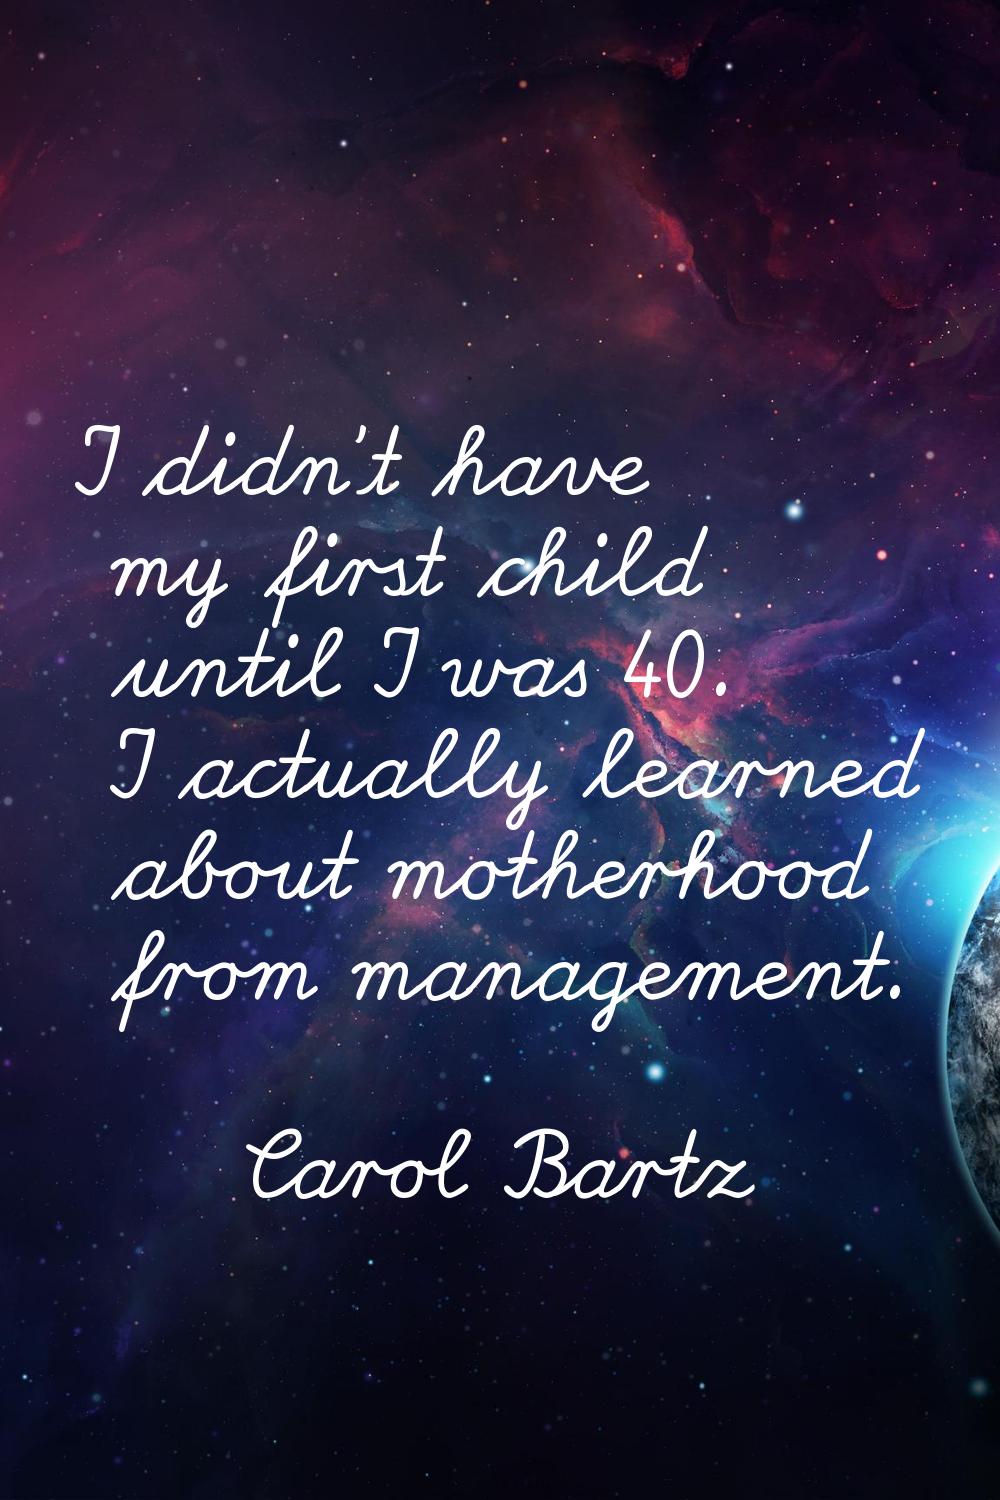 I didn't have my first child until I was 40. I actually learned about motherhood from management.